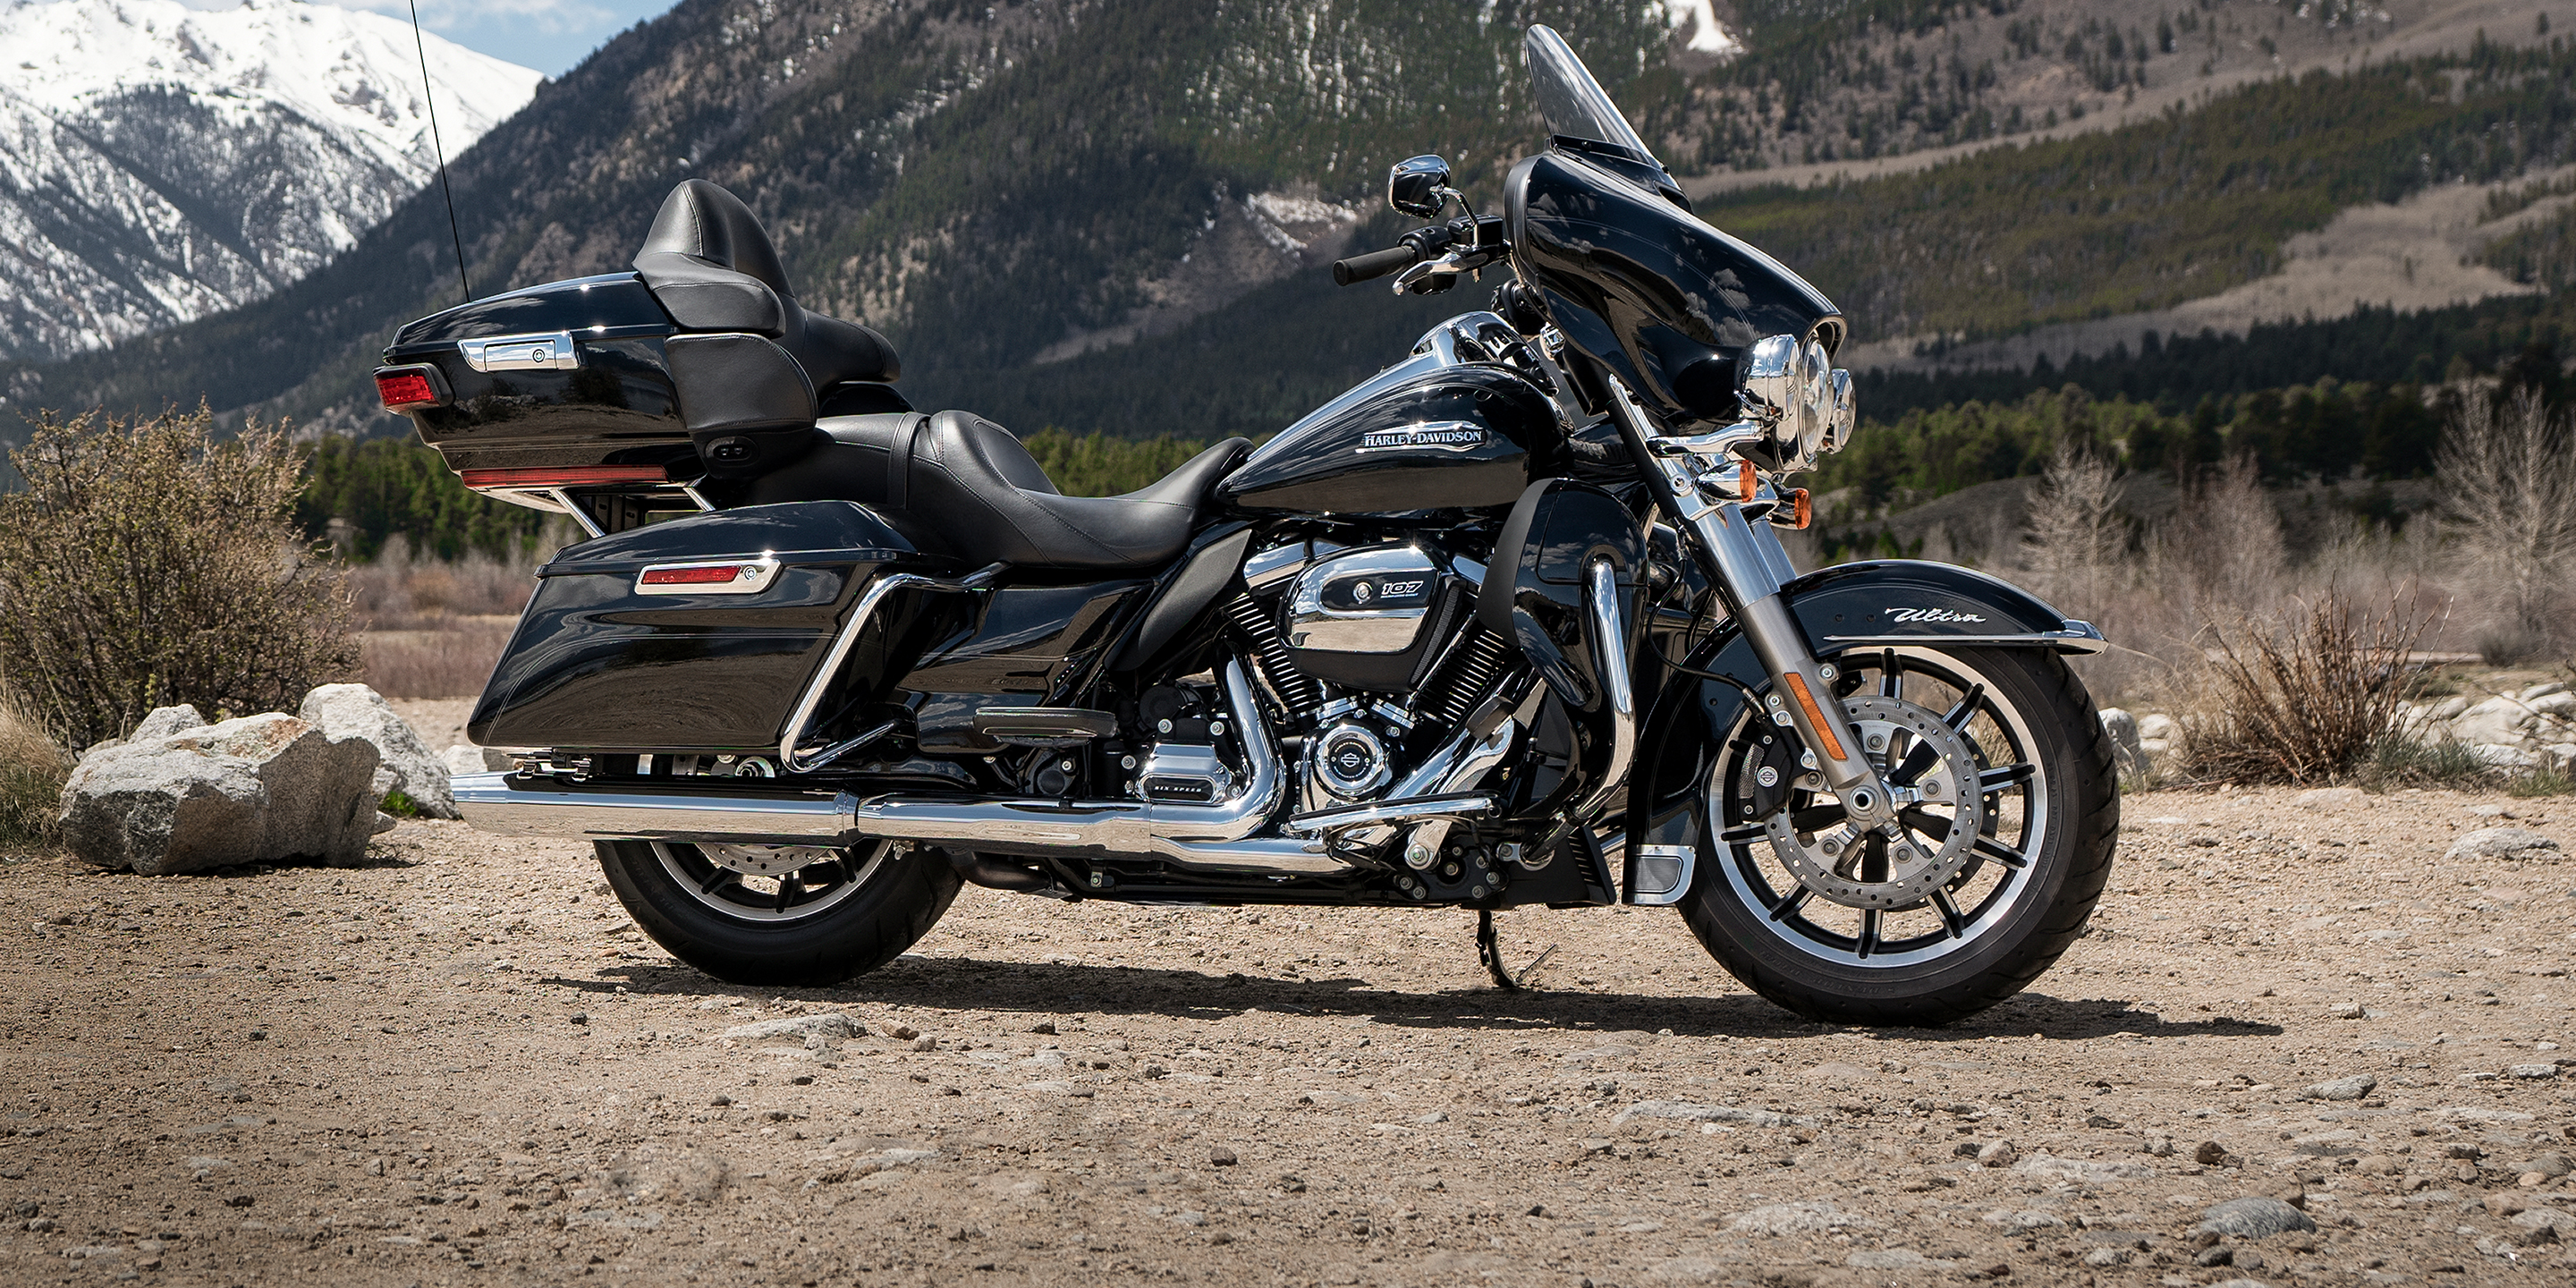 2019 Electra Glide Ultra Classic Motorcycle Harley Davidson Canada